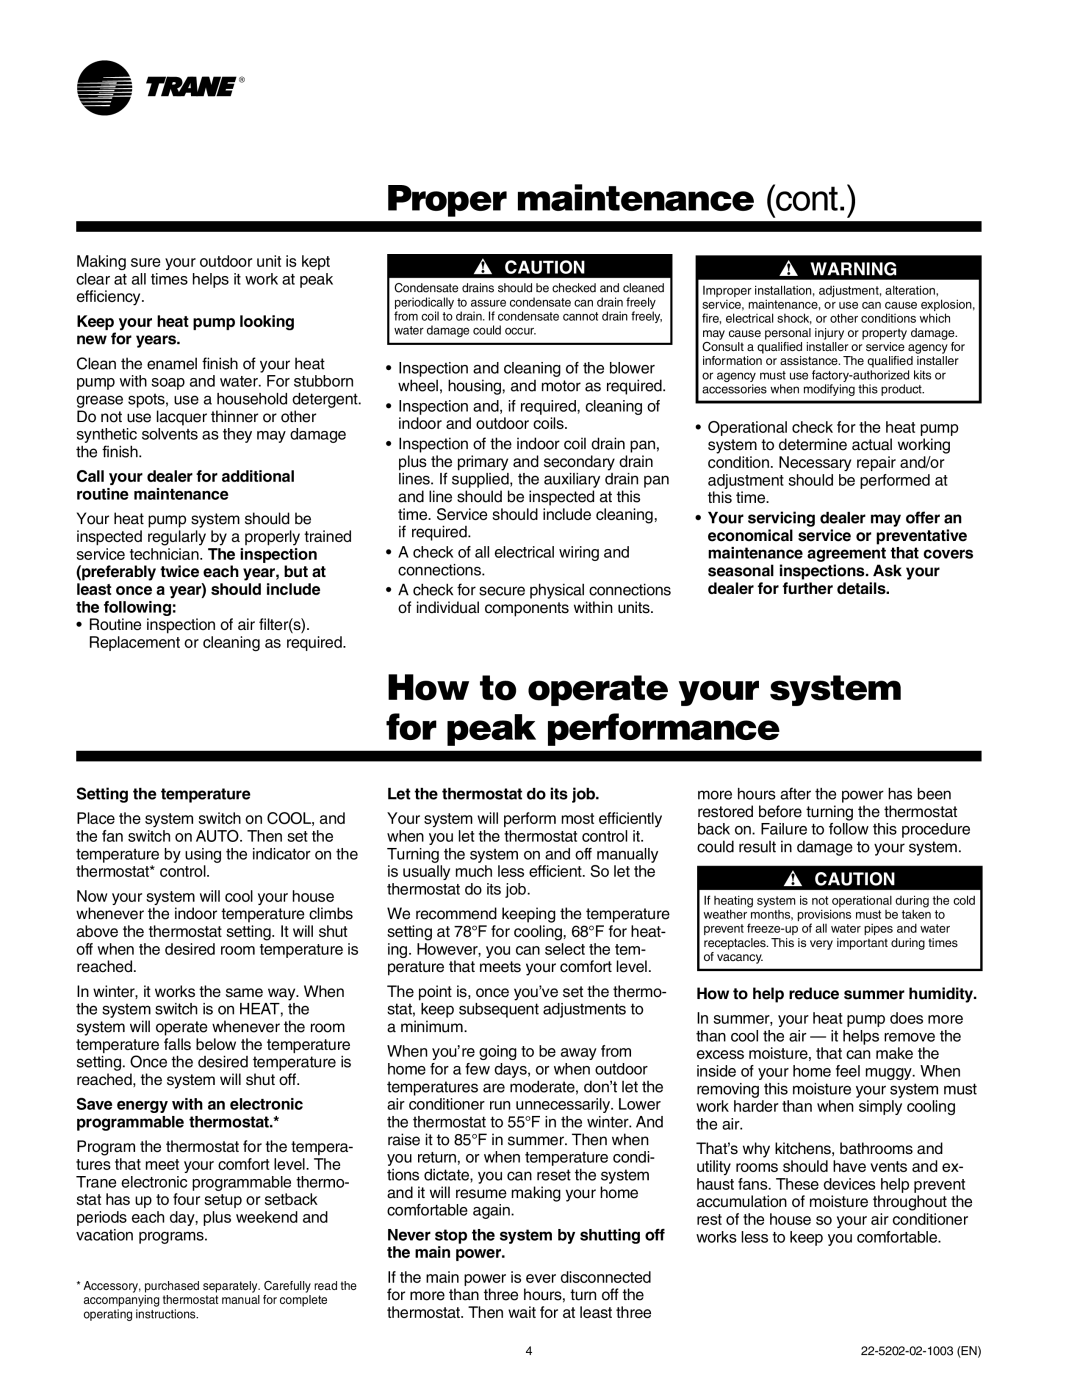 Trane 2TWB-SVU01A-EN Proper maintenance cont, How to operate your system for peak performance, Setting the temperature 